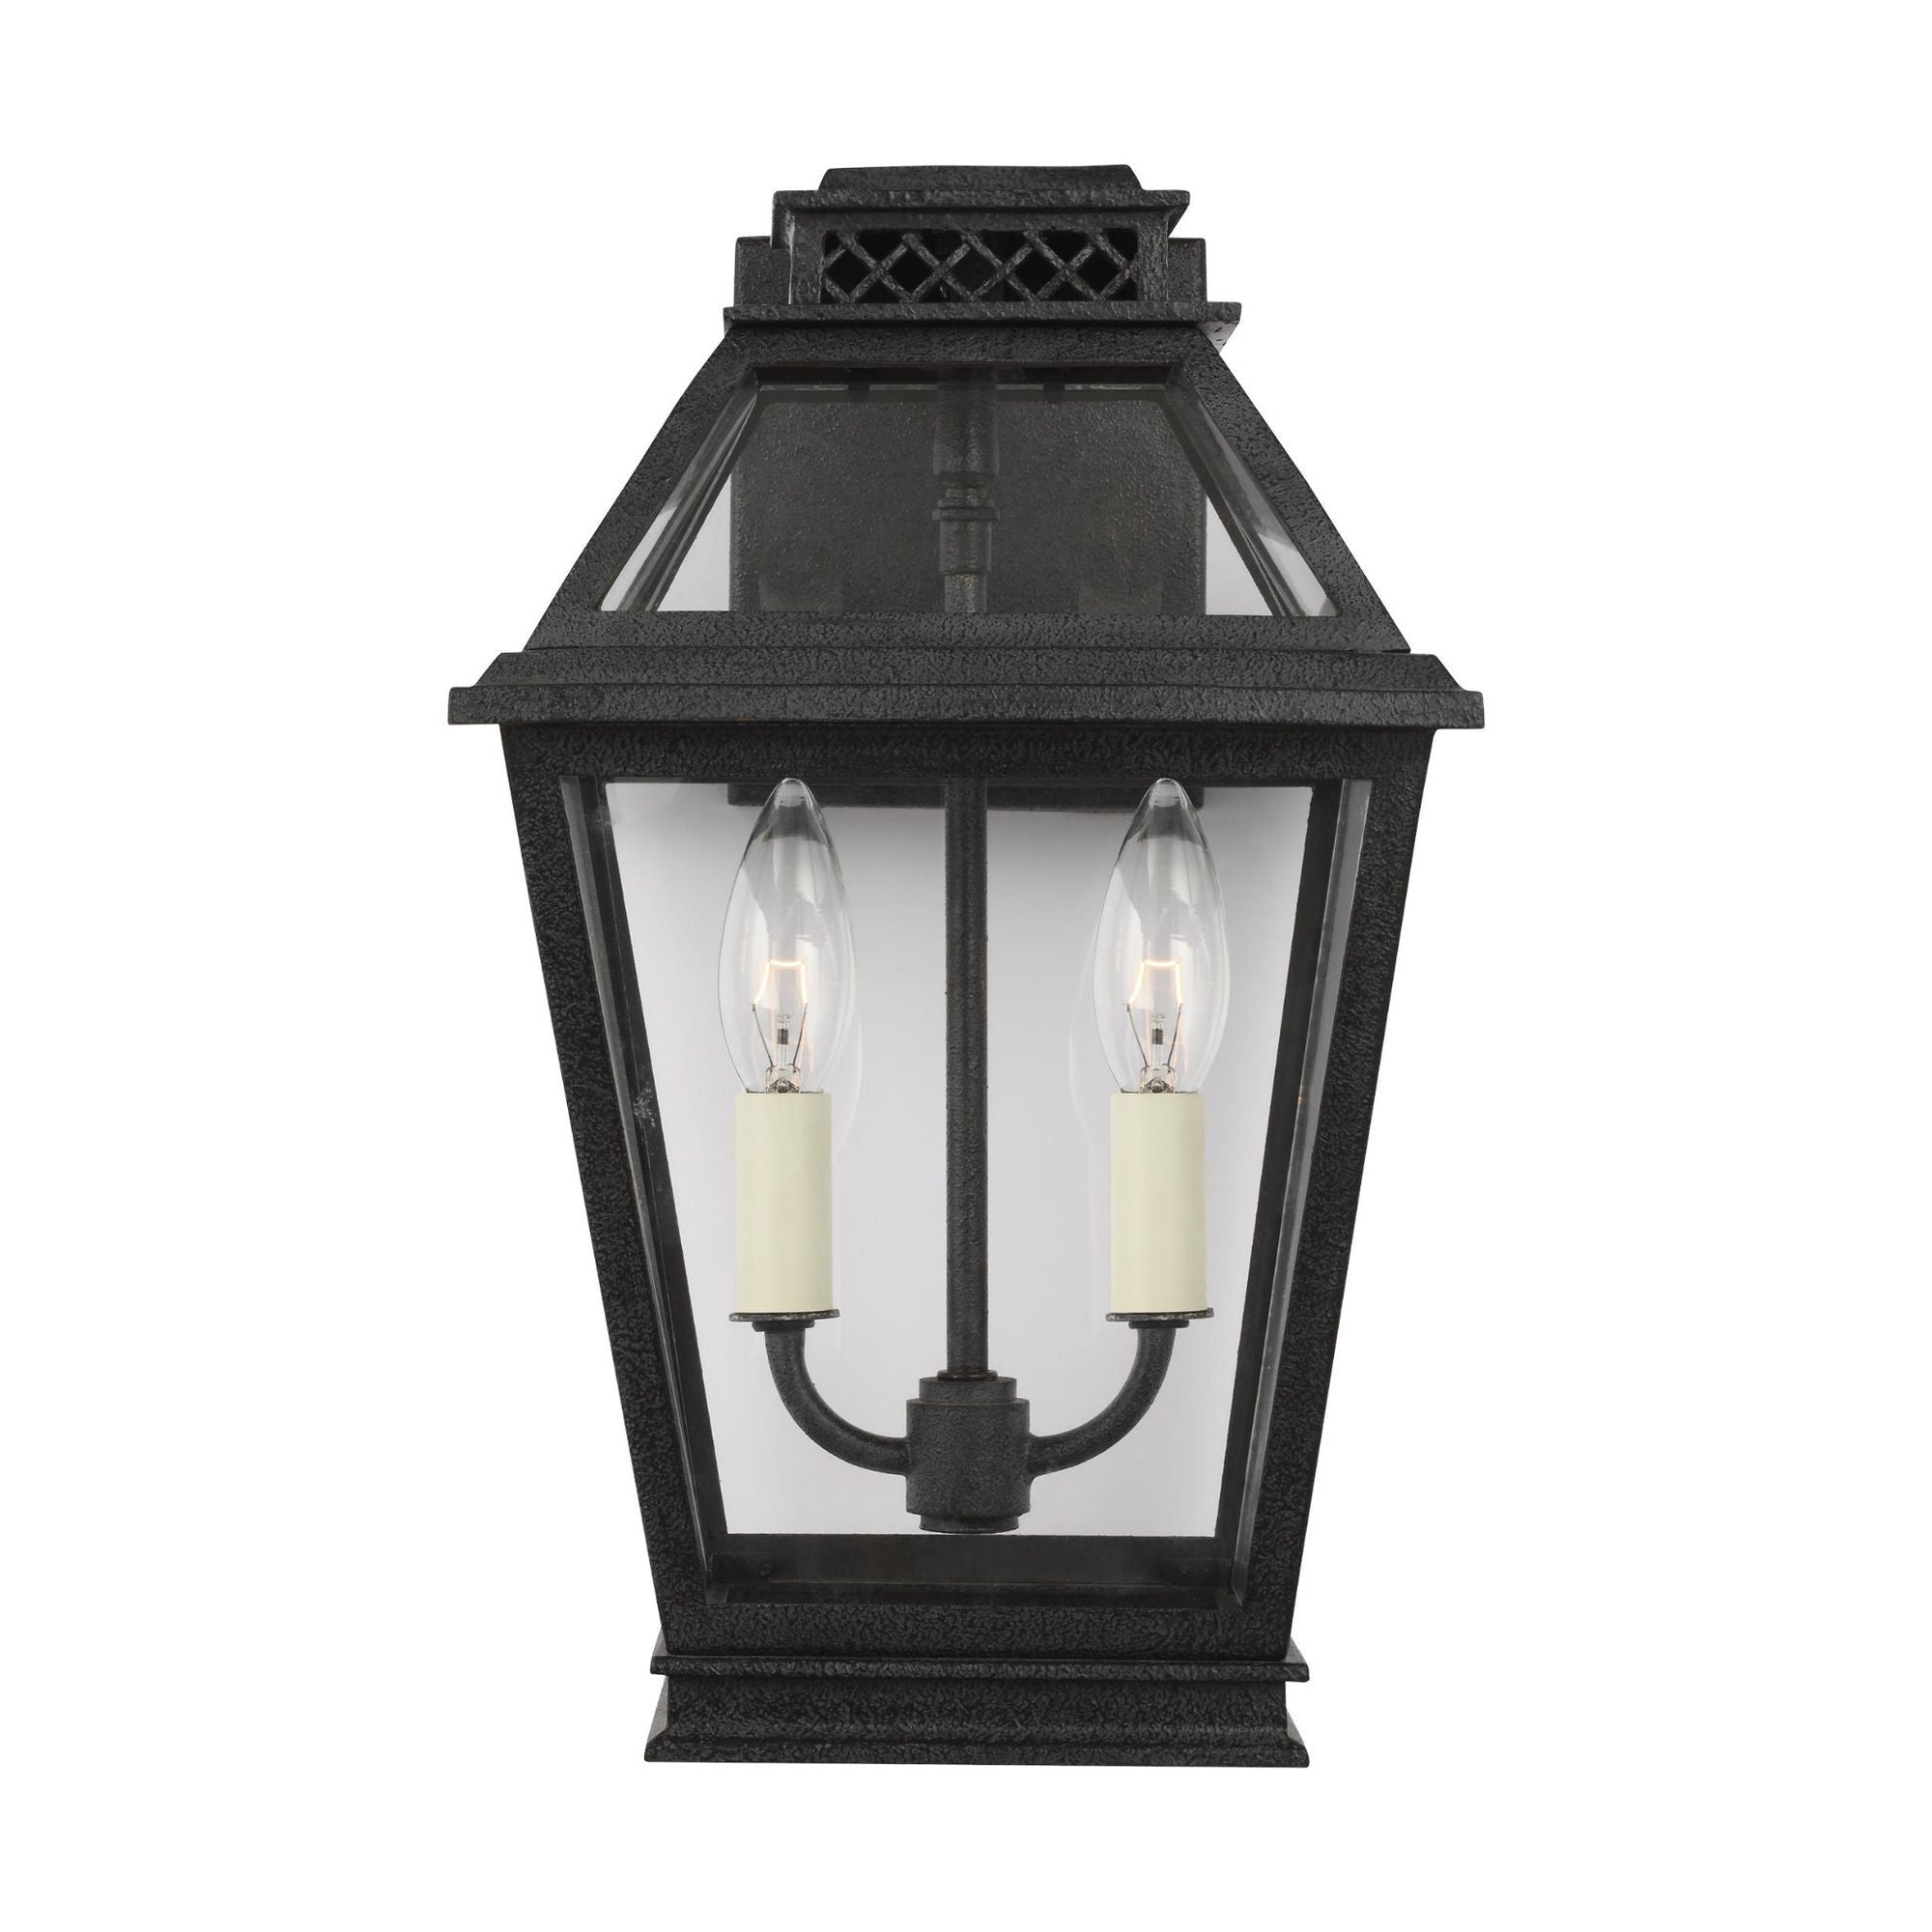 Chapman & Myers Falmouth Small Outdoor Wall Lantern in Dark Weathered Zinc